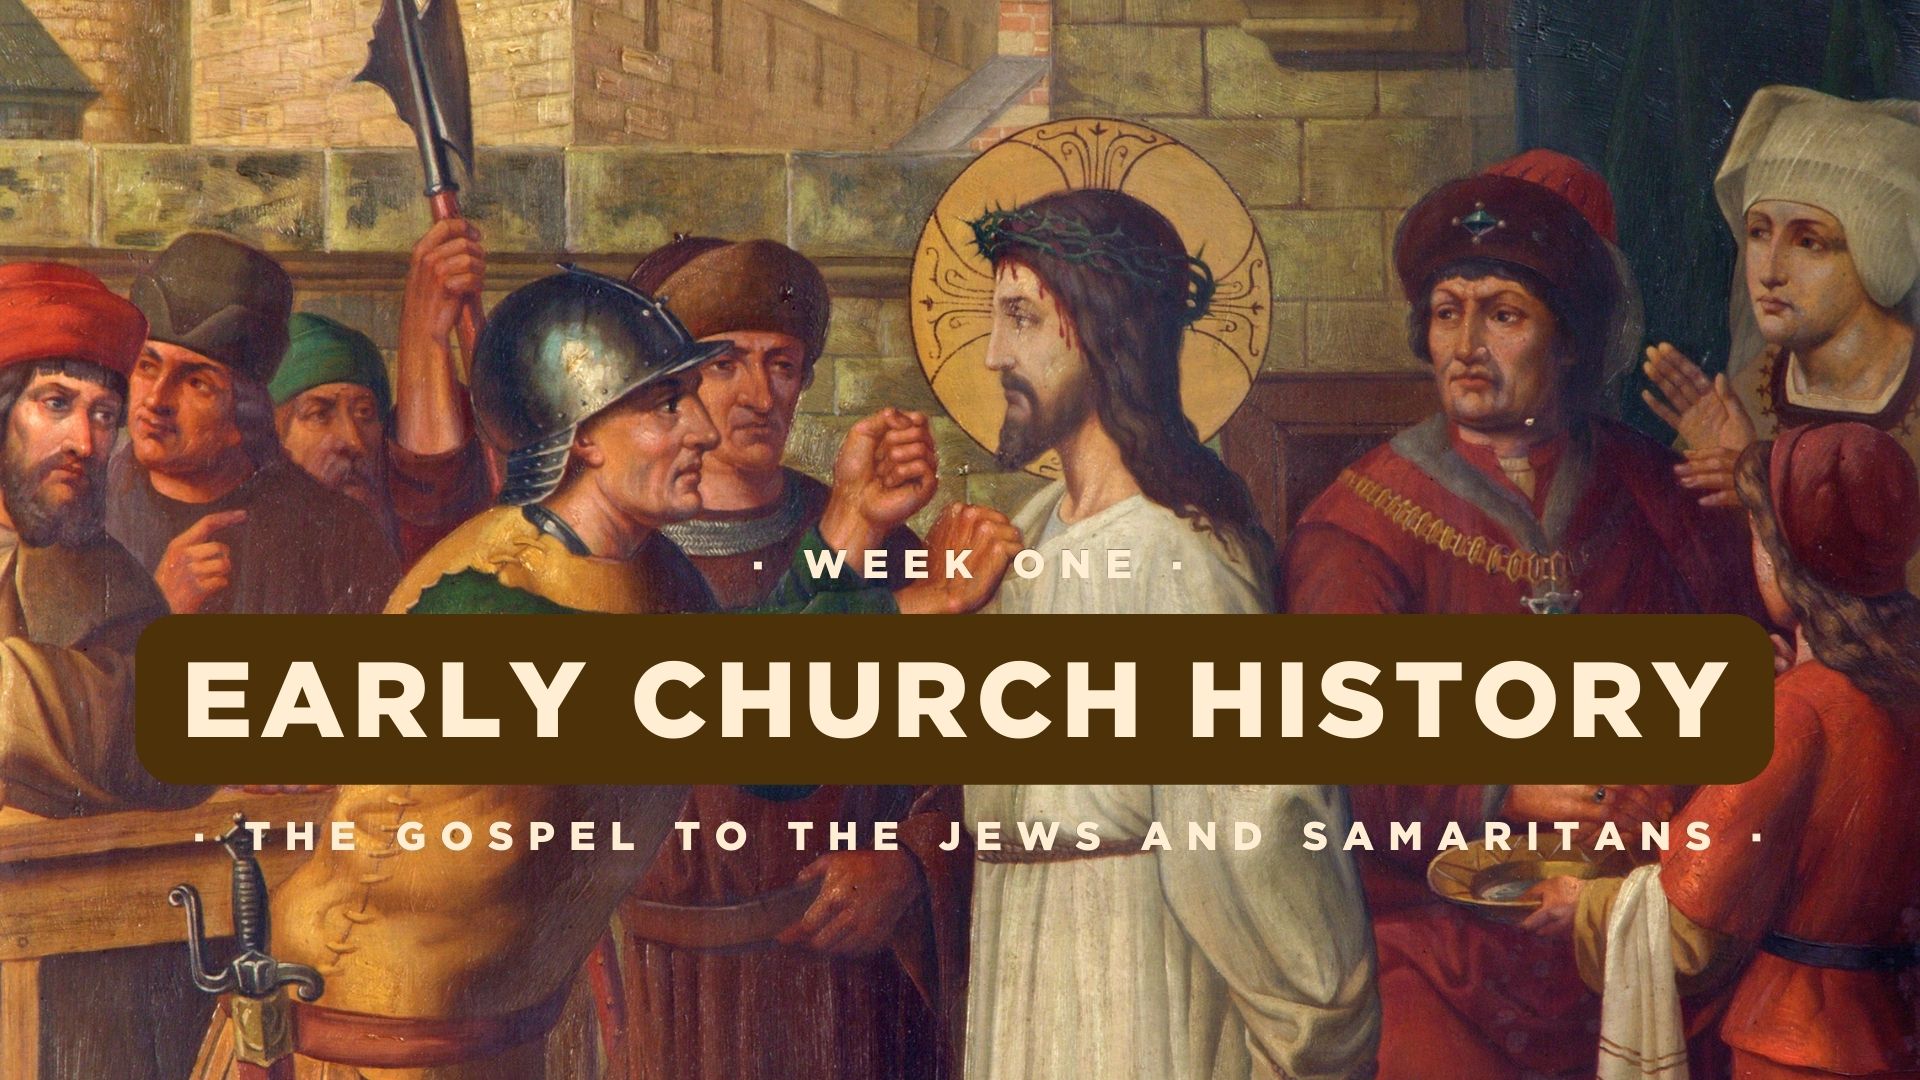 Early Church History - Week One - Gospel to the Jews and Samaritans